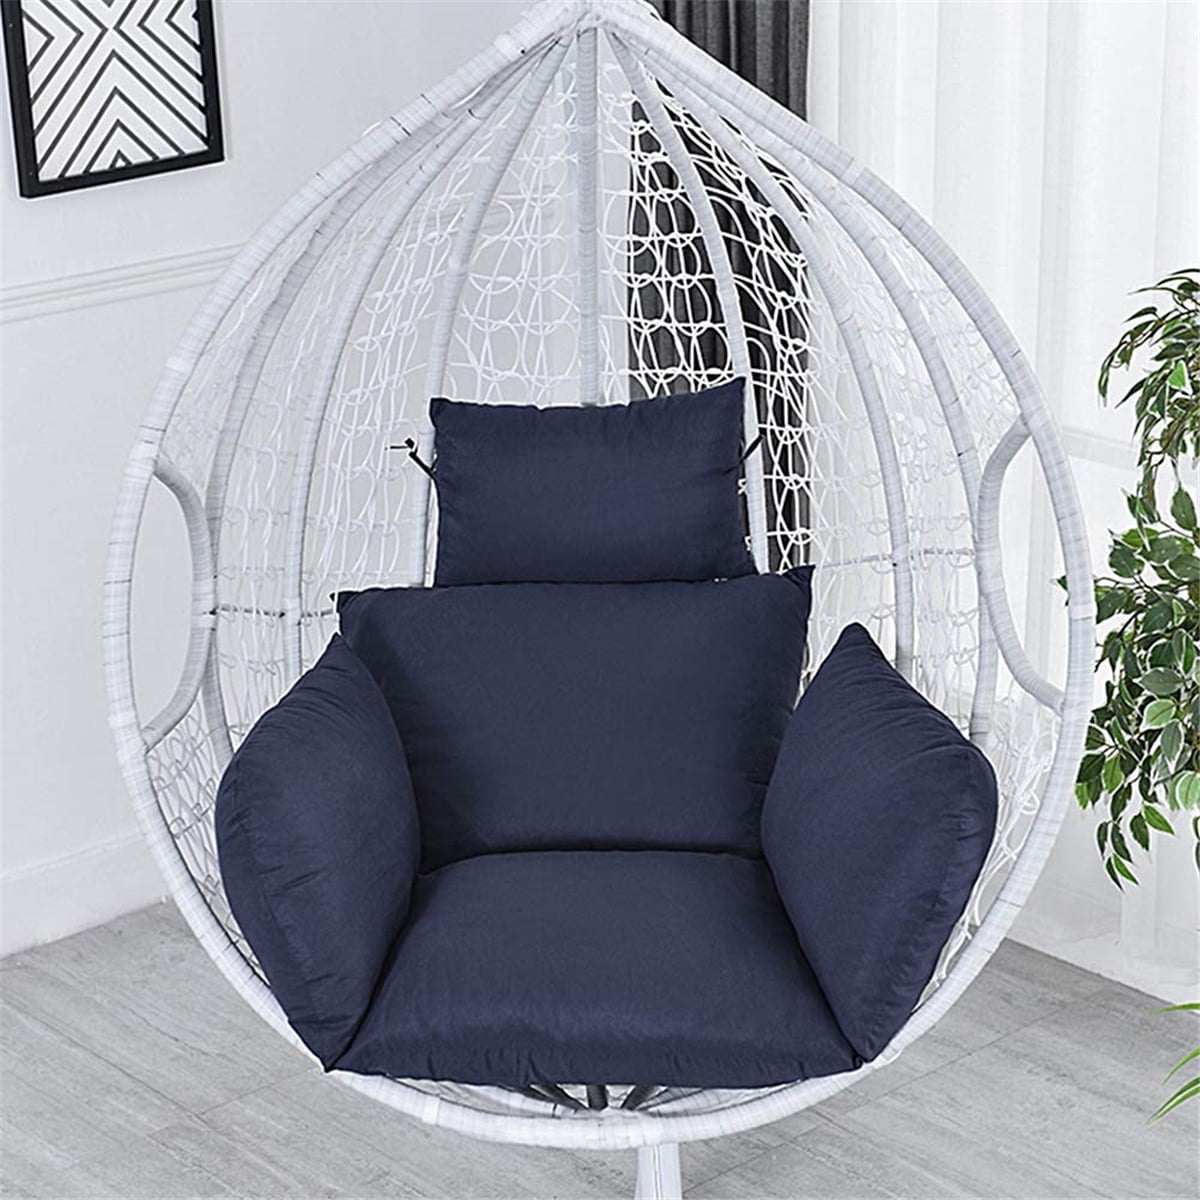 A D105cm Without Stand PP&DD Hanging Cushion,Egg Hammock Chair Pads,Swing Seat Cushion,Large Size Thick Nest Hanging Chair Back 41inch 